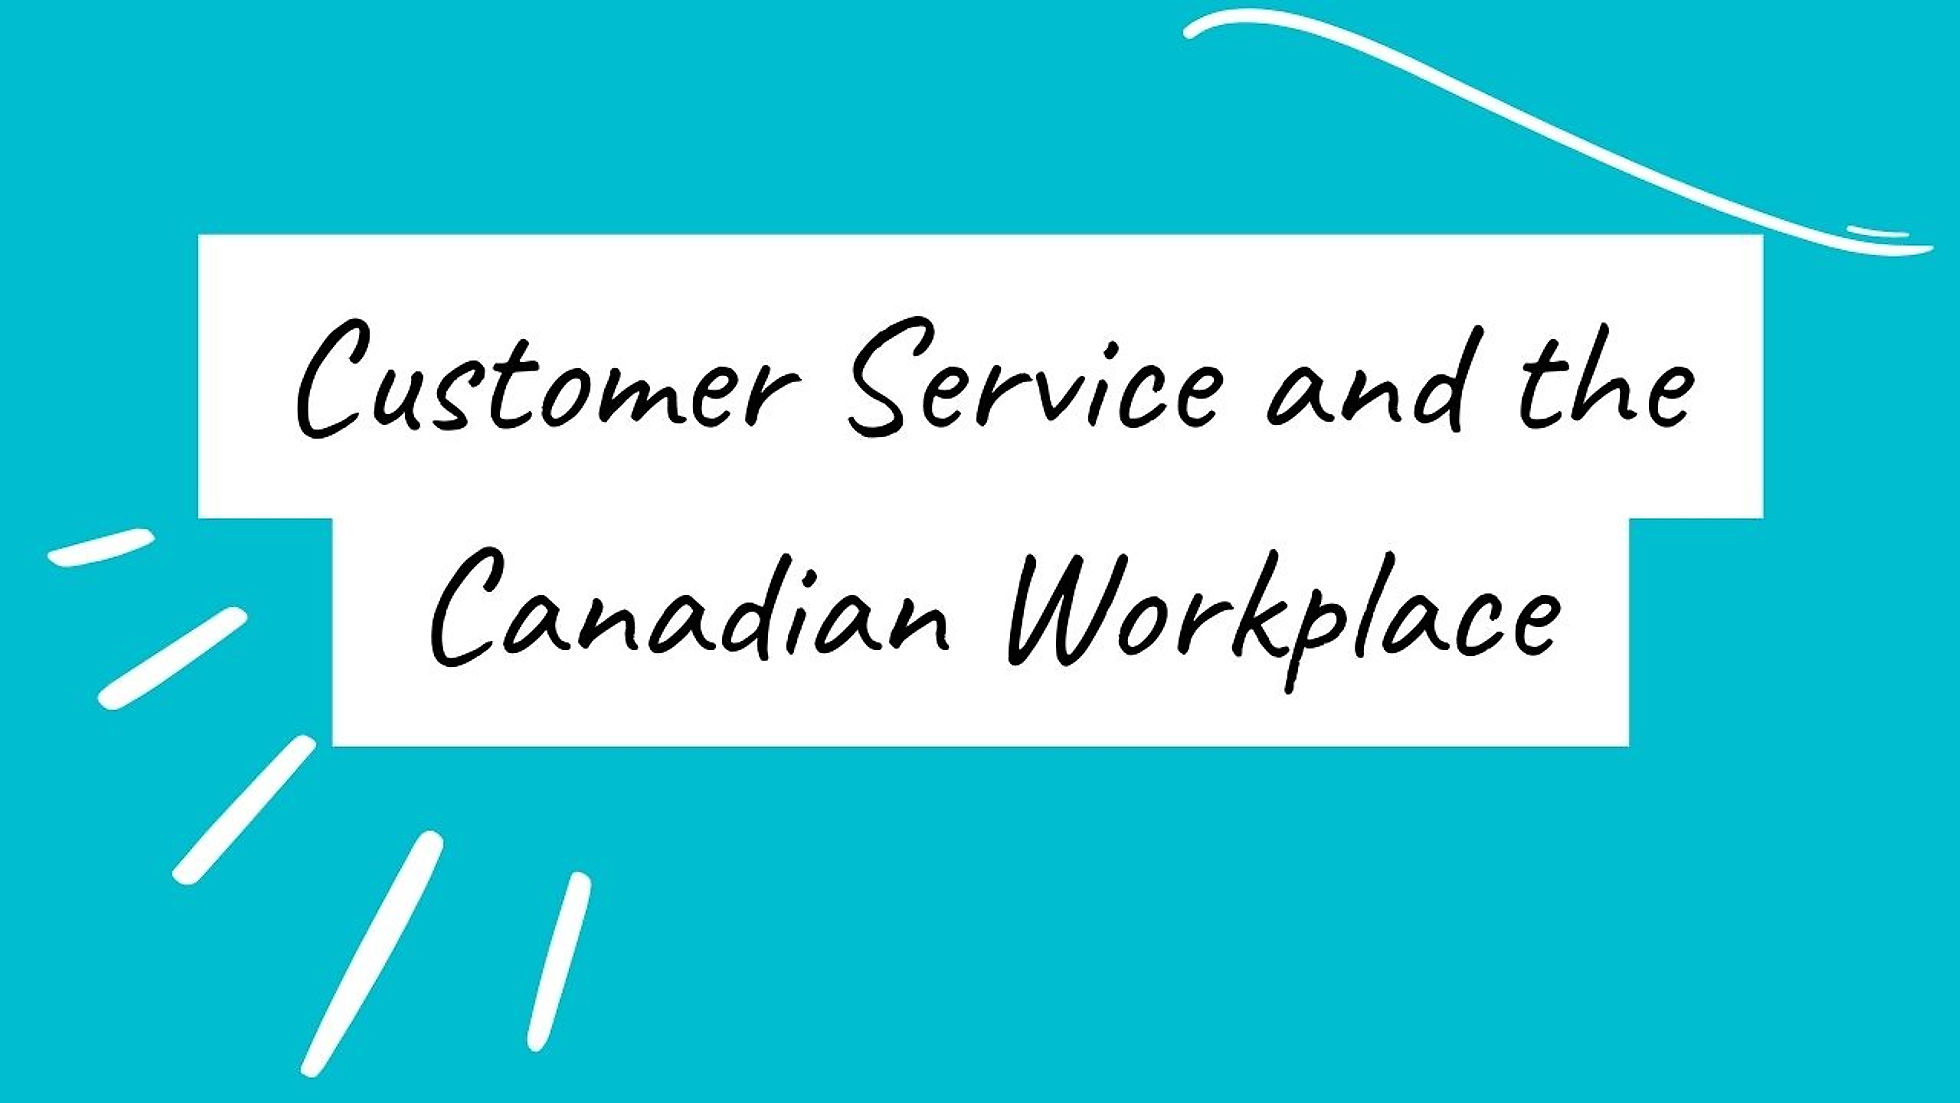 Customer Service and the Canadian Workplace